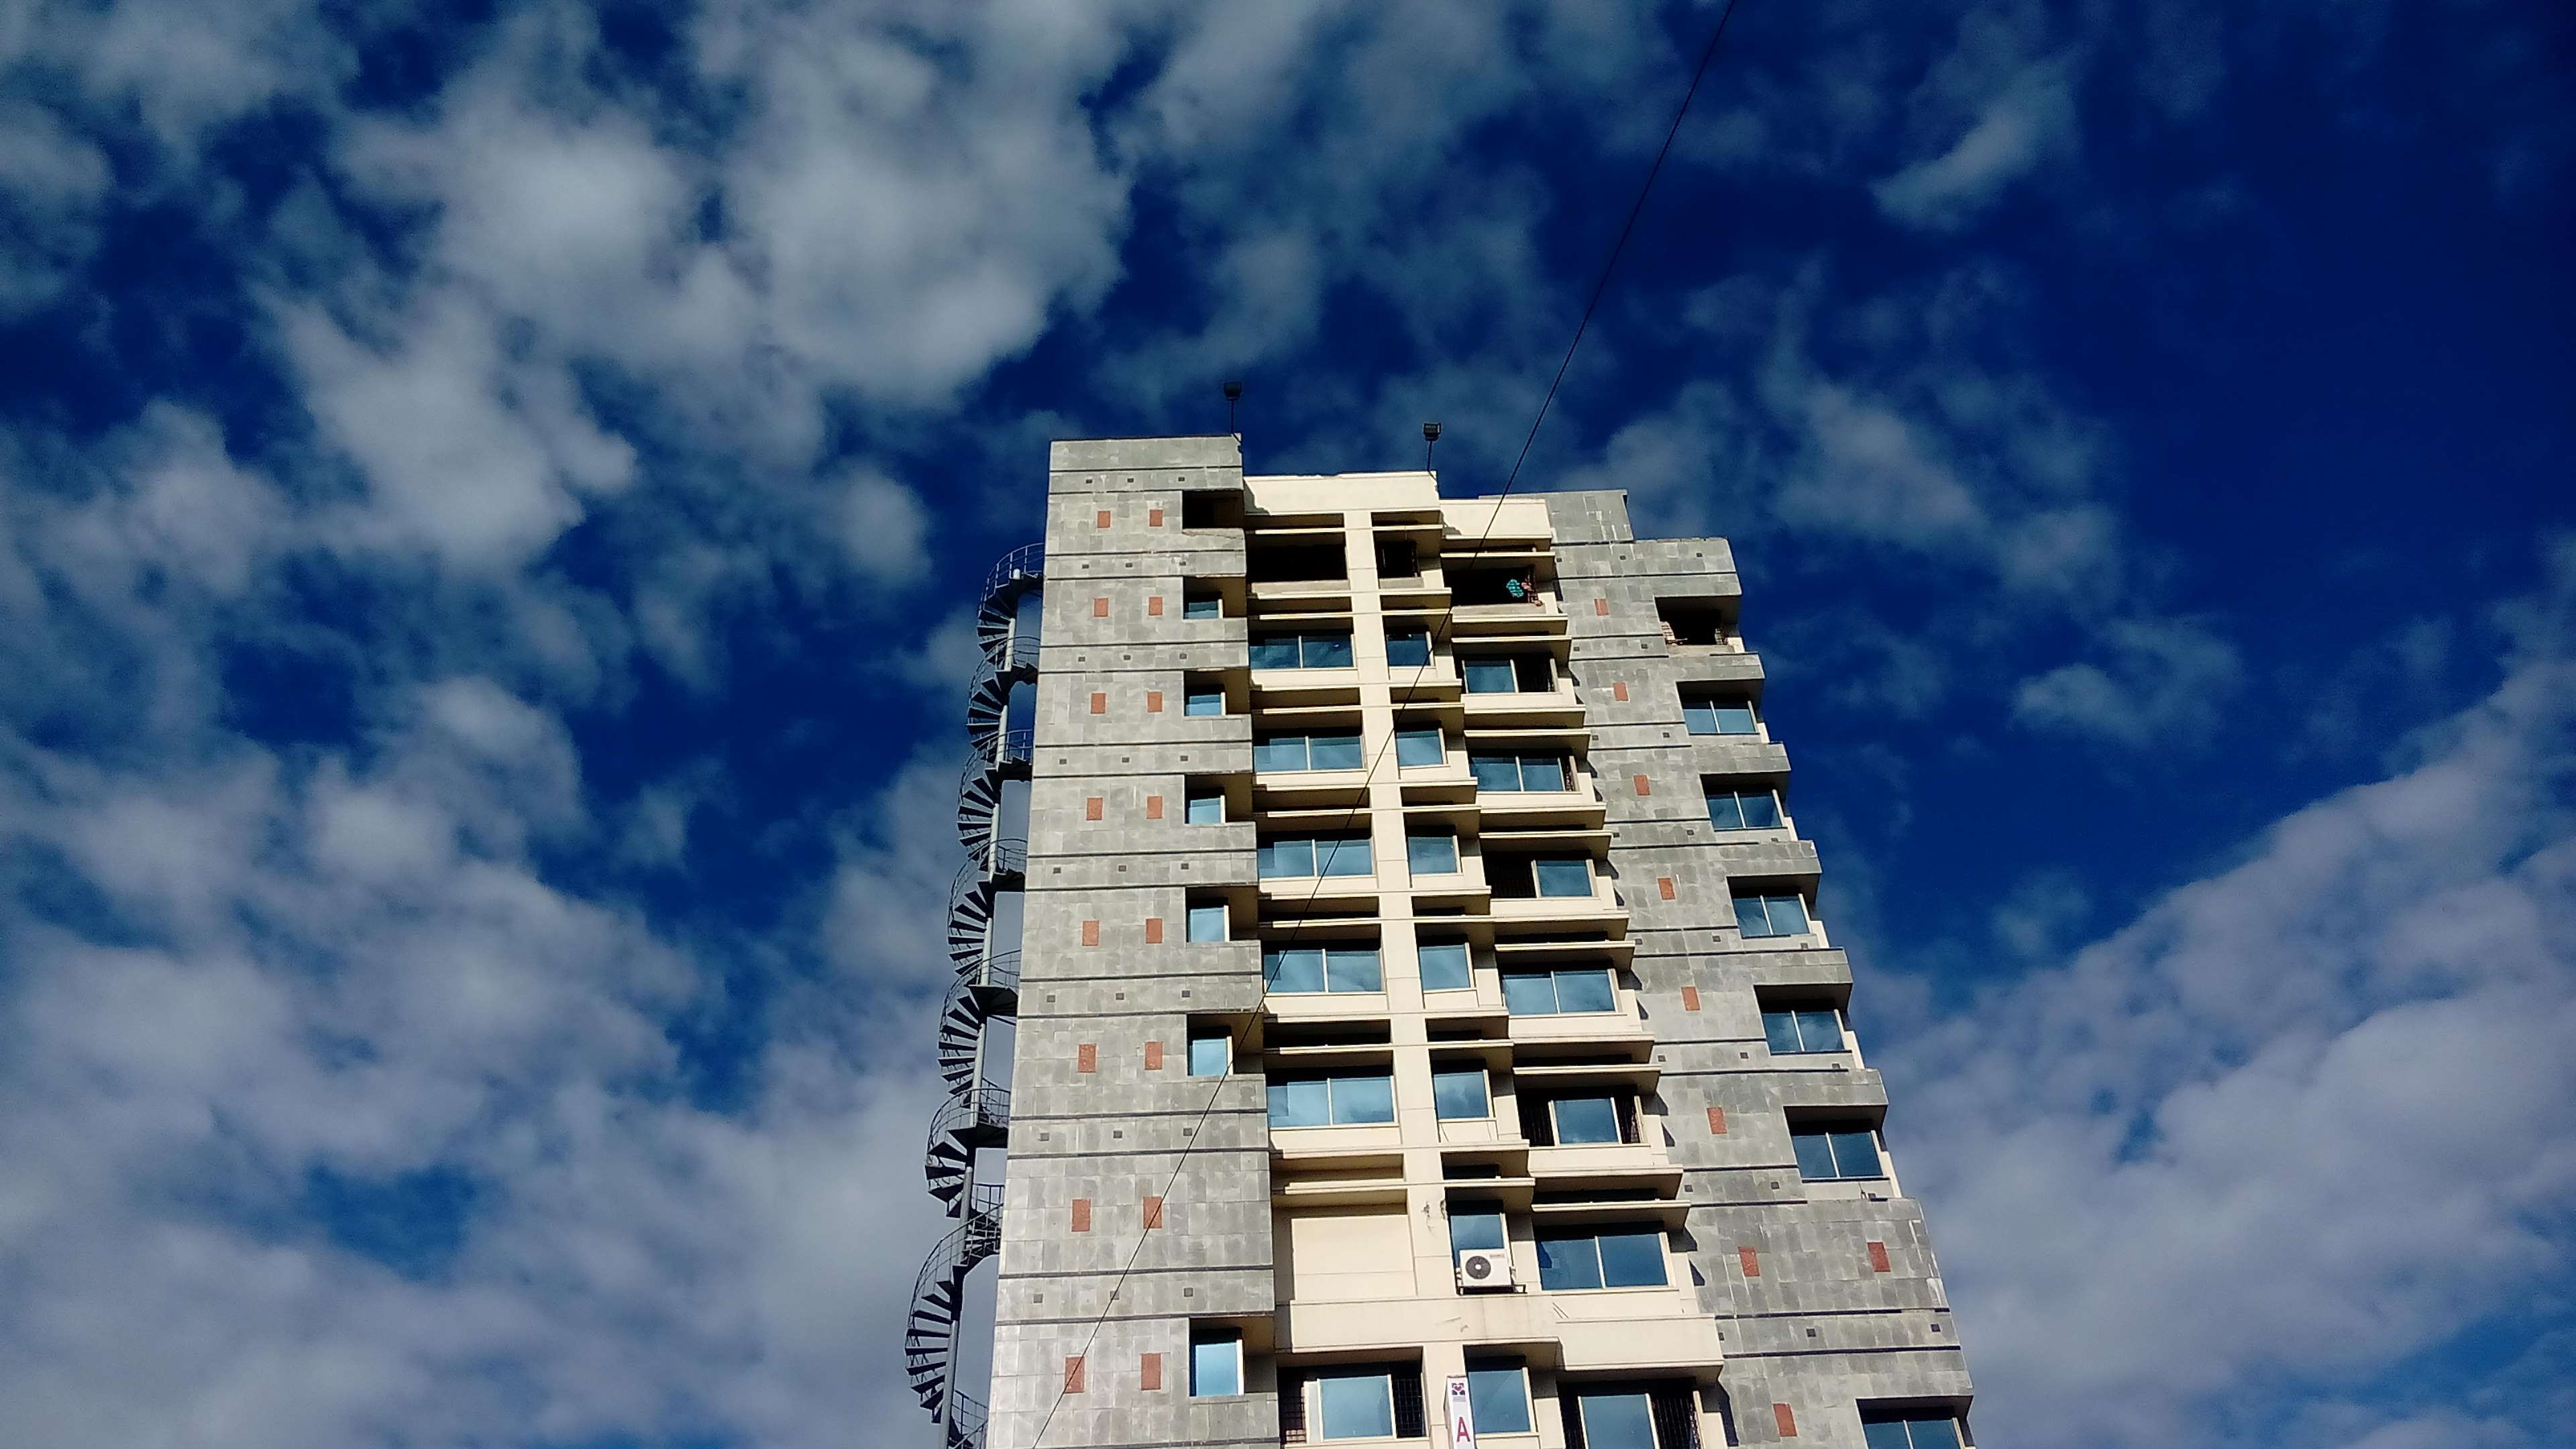 Free Stock Images - Tower Block , HD Wallpaper & Backgrounds